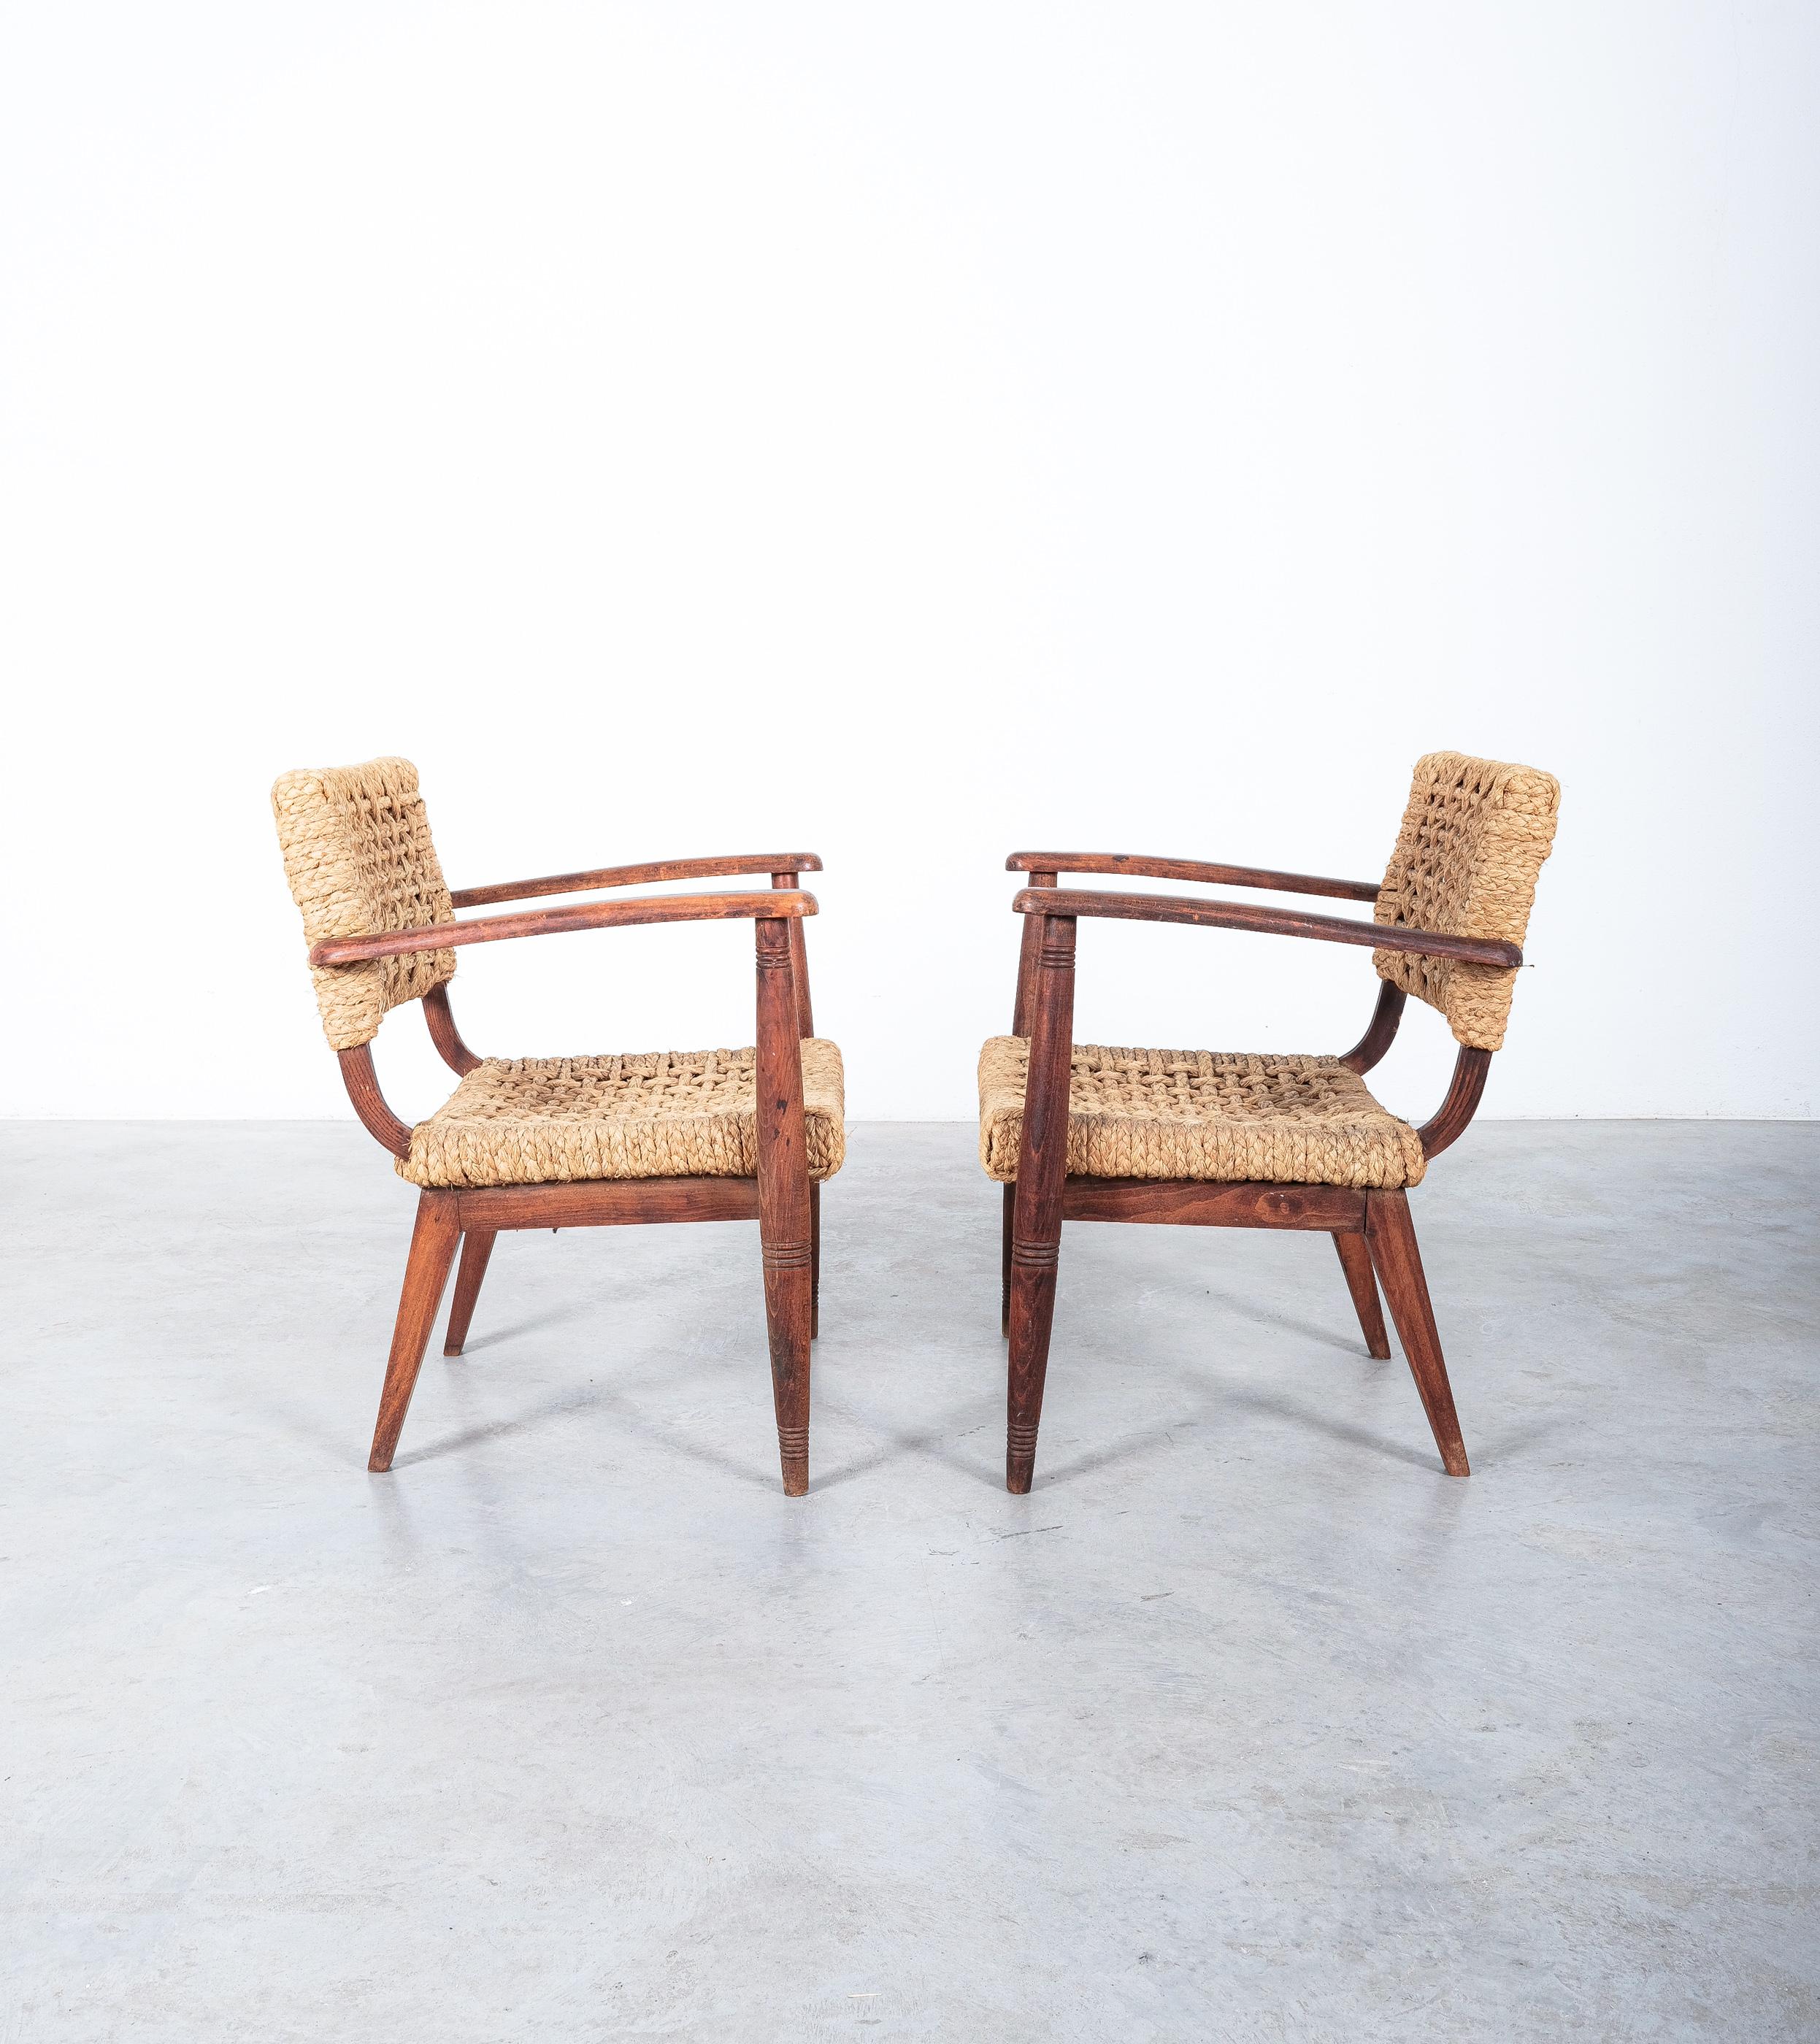 Pair of Rope Lounge Chairs by Adrien Audoux and Frida Minet, France, 1950 1